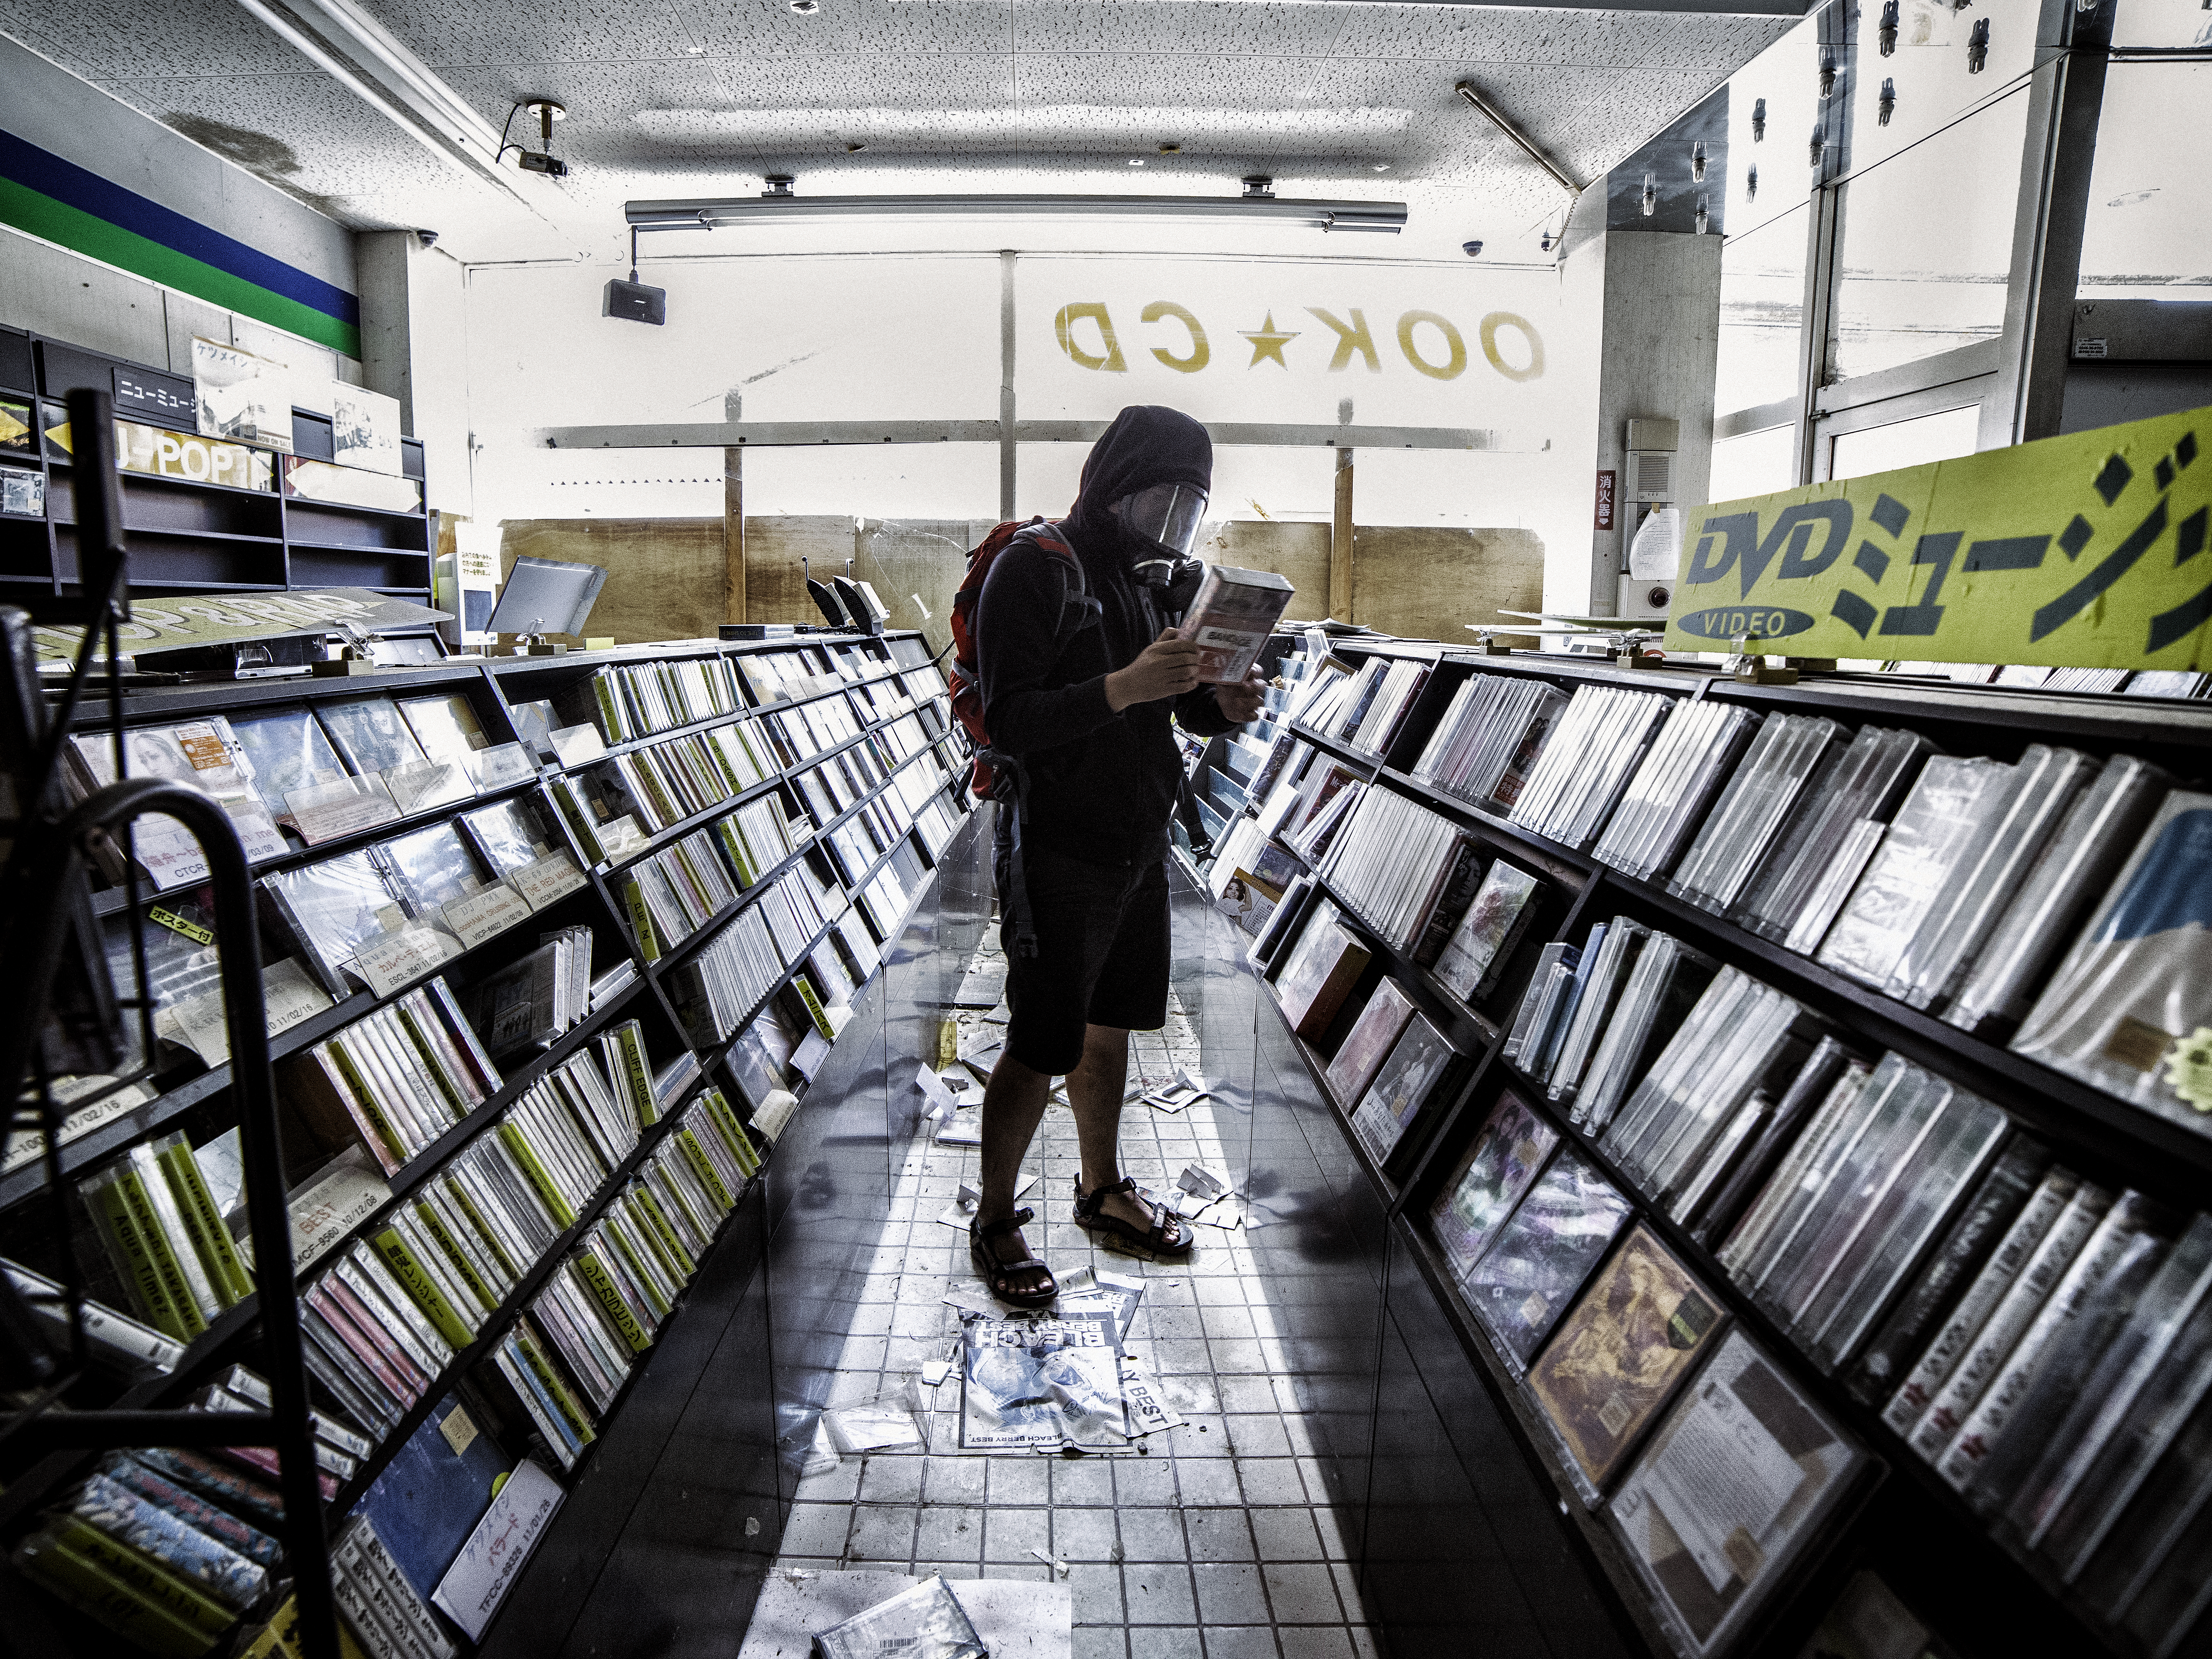 Keow Wee Loong browses CDs at a shop in Namie.